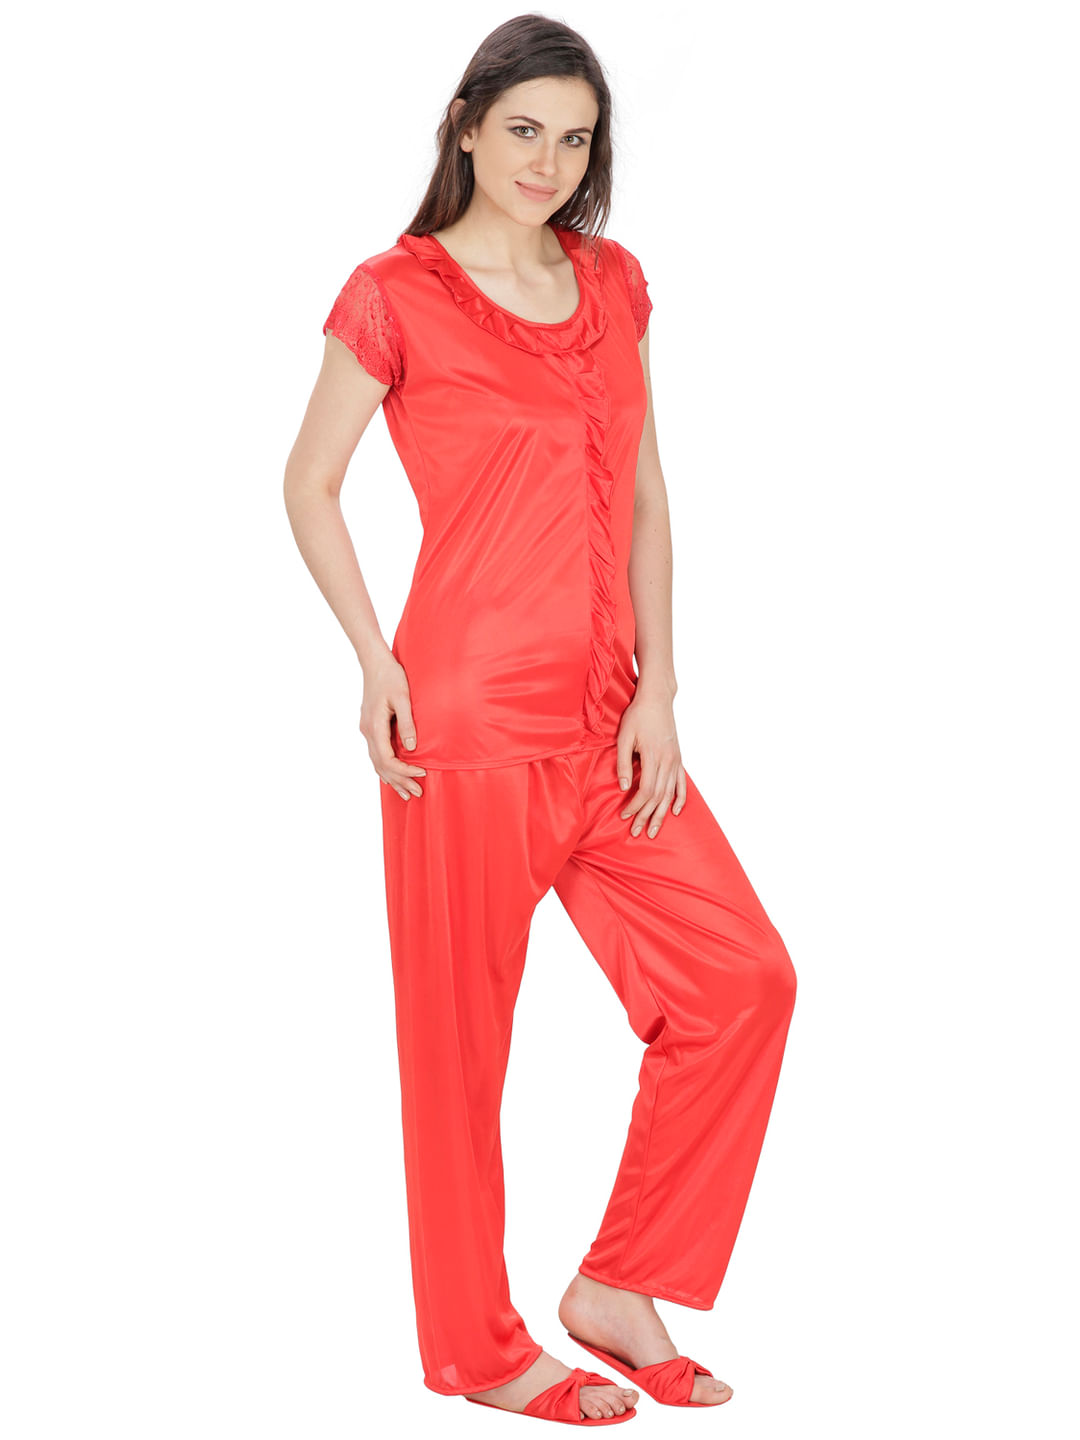 Secret Wish Women's Satin Red Nightsuit Set with Slippers (Red, Free Size)